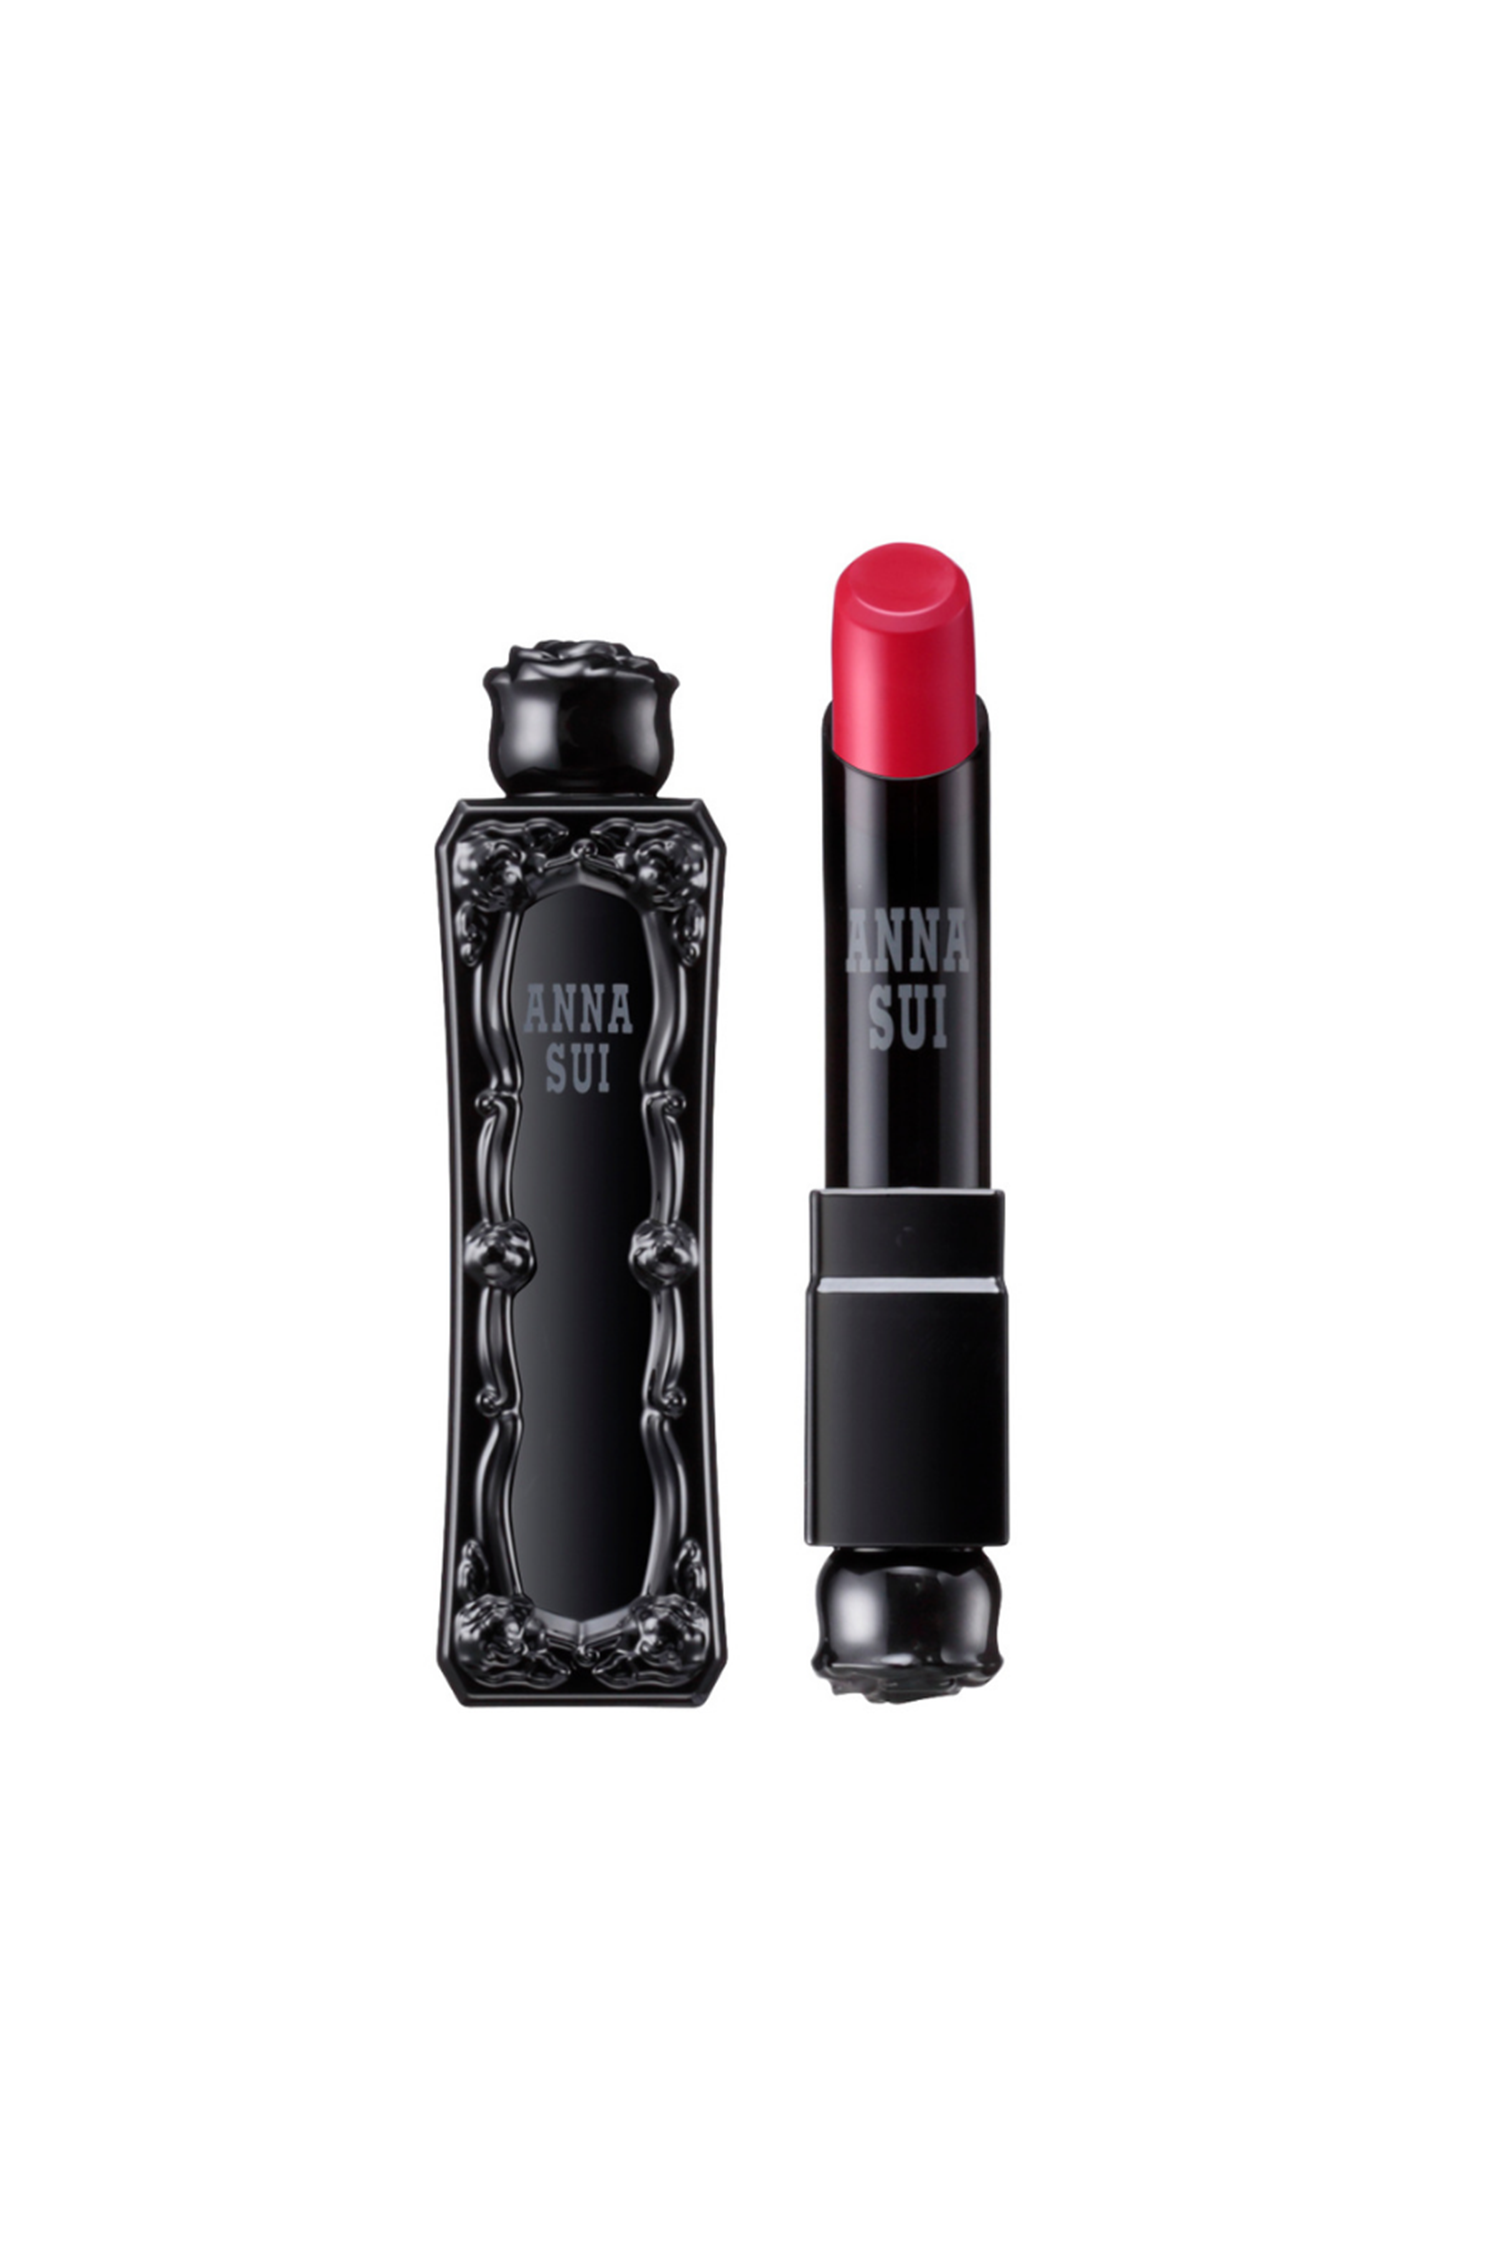 Lipstick, inspired by the Anna fragrance bottle, black container with raised rose pattern, rose on top